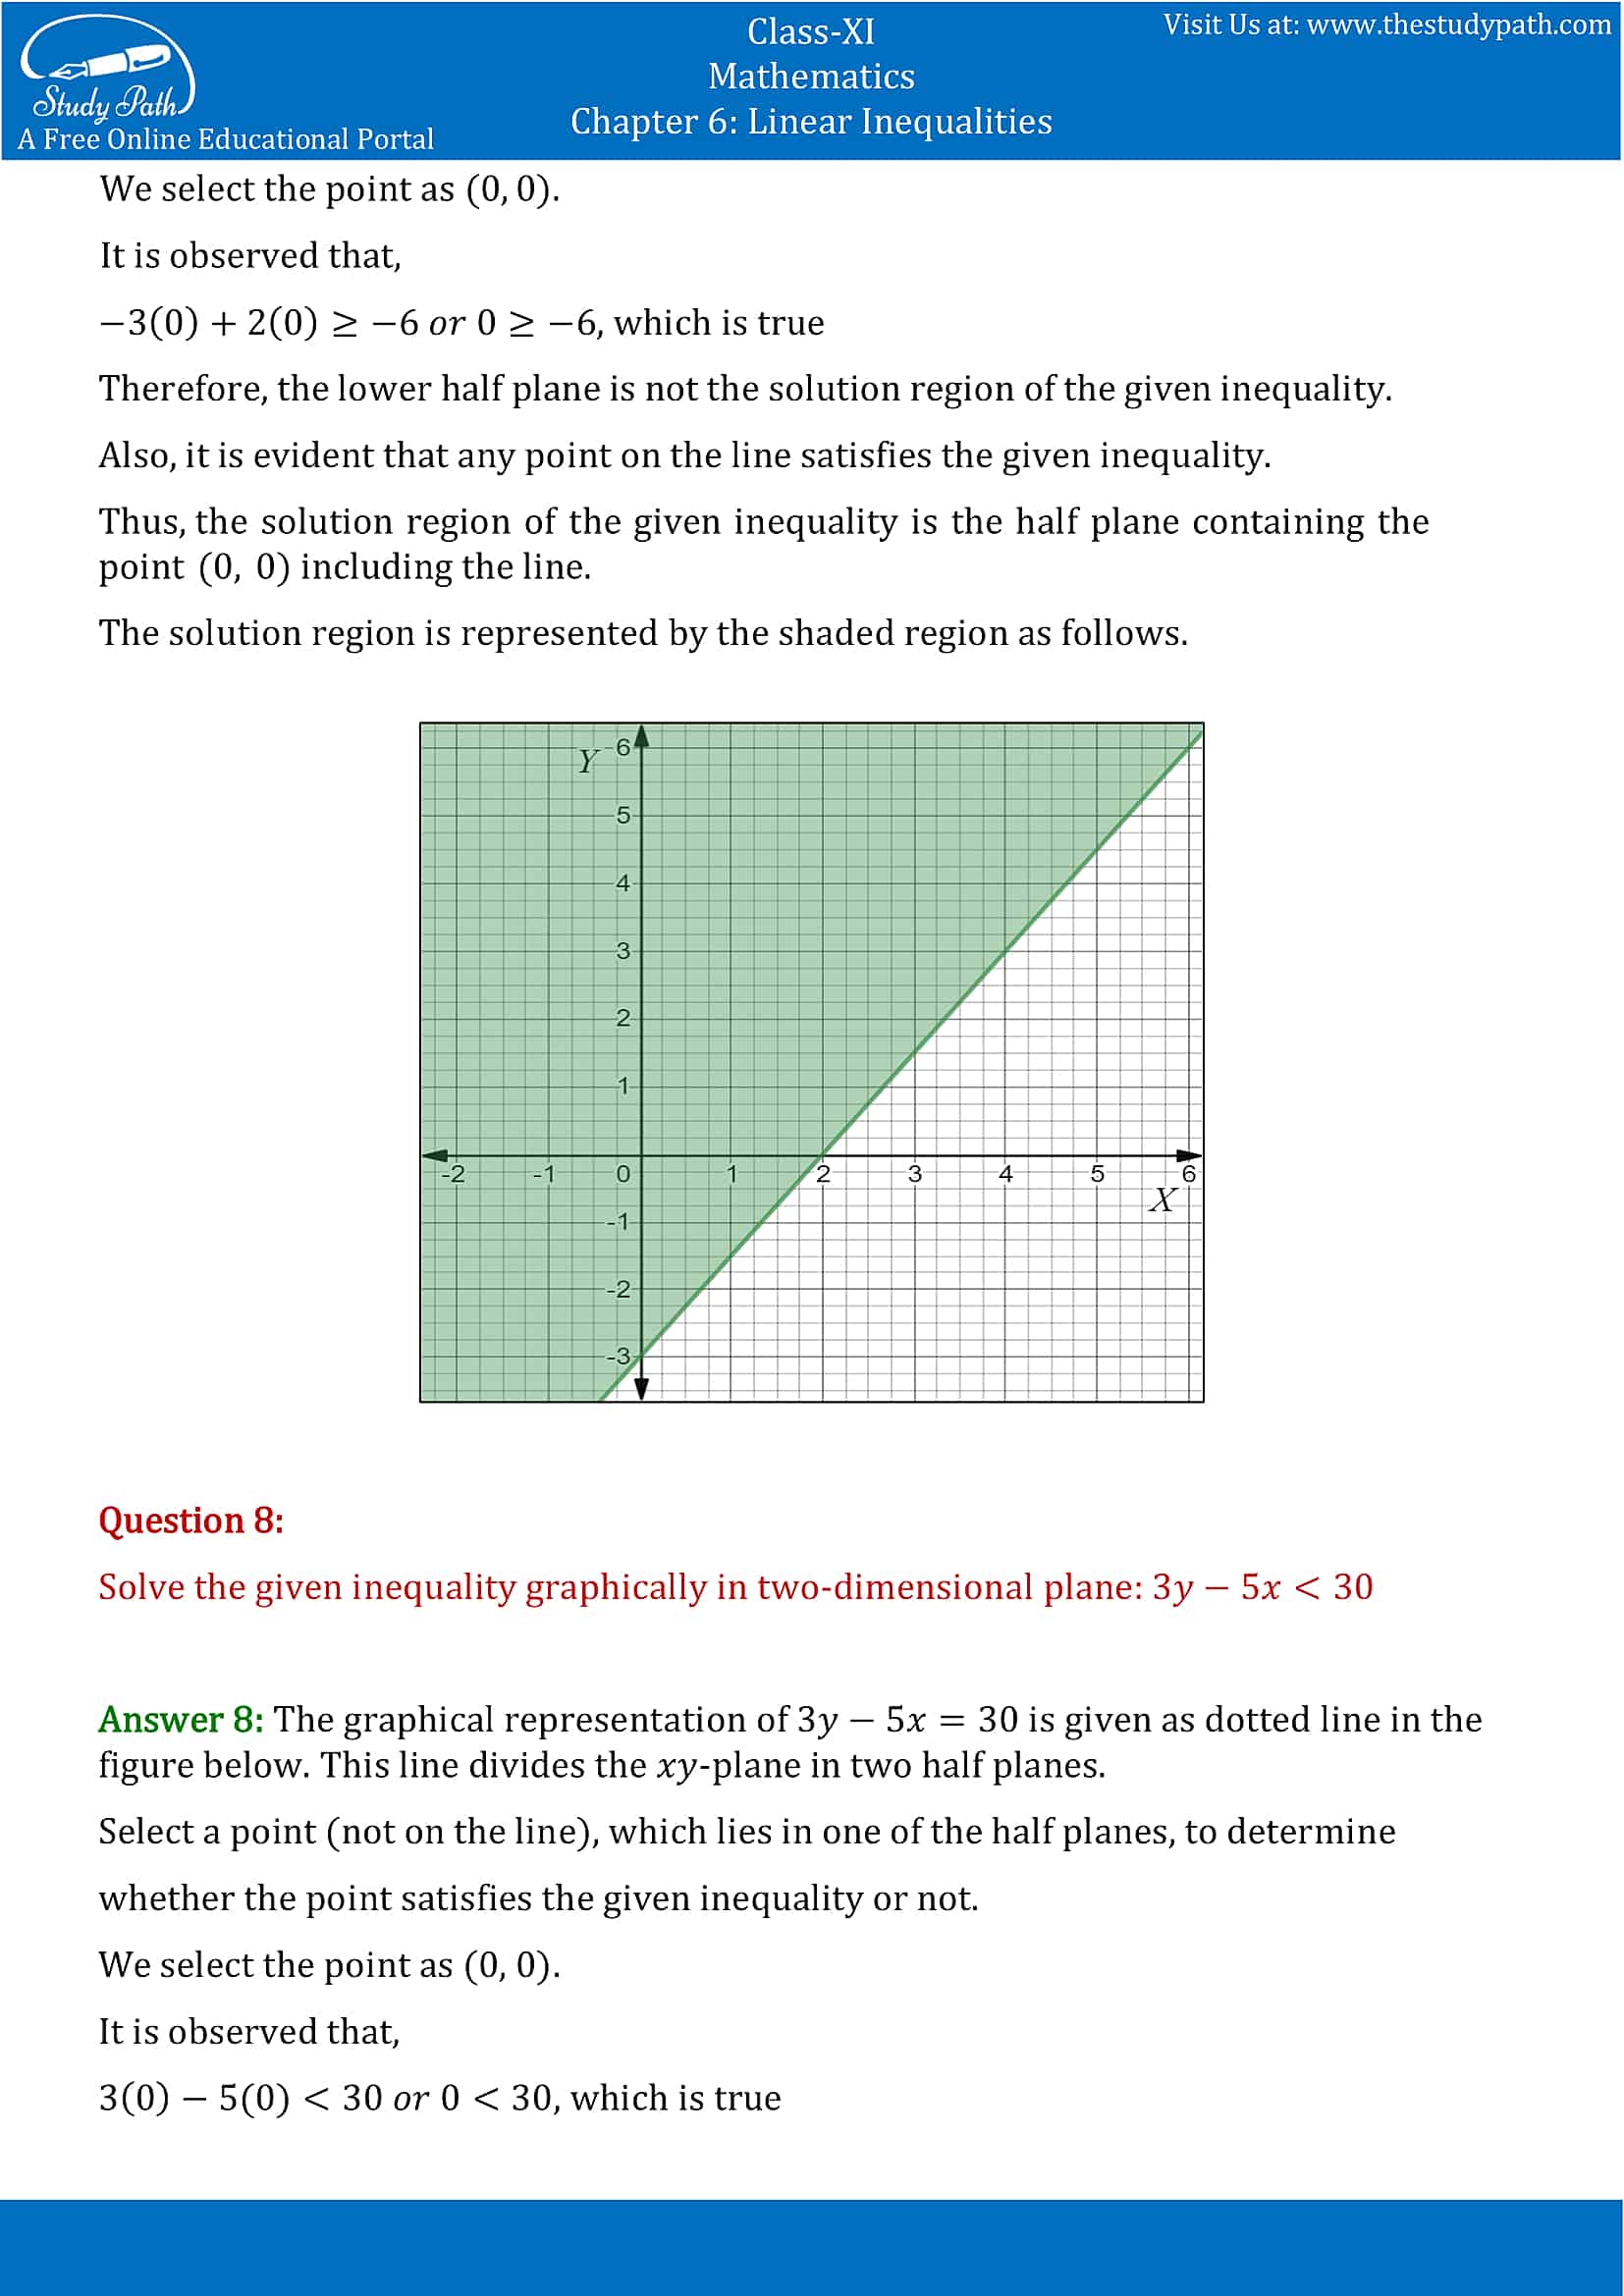 NCERT Solutions for Class 11 Maths chapter 6 Linear Inequalities Exercise 6.2 Part-6